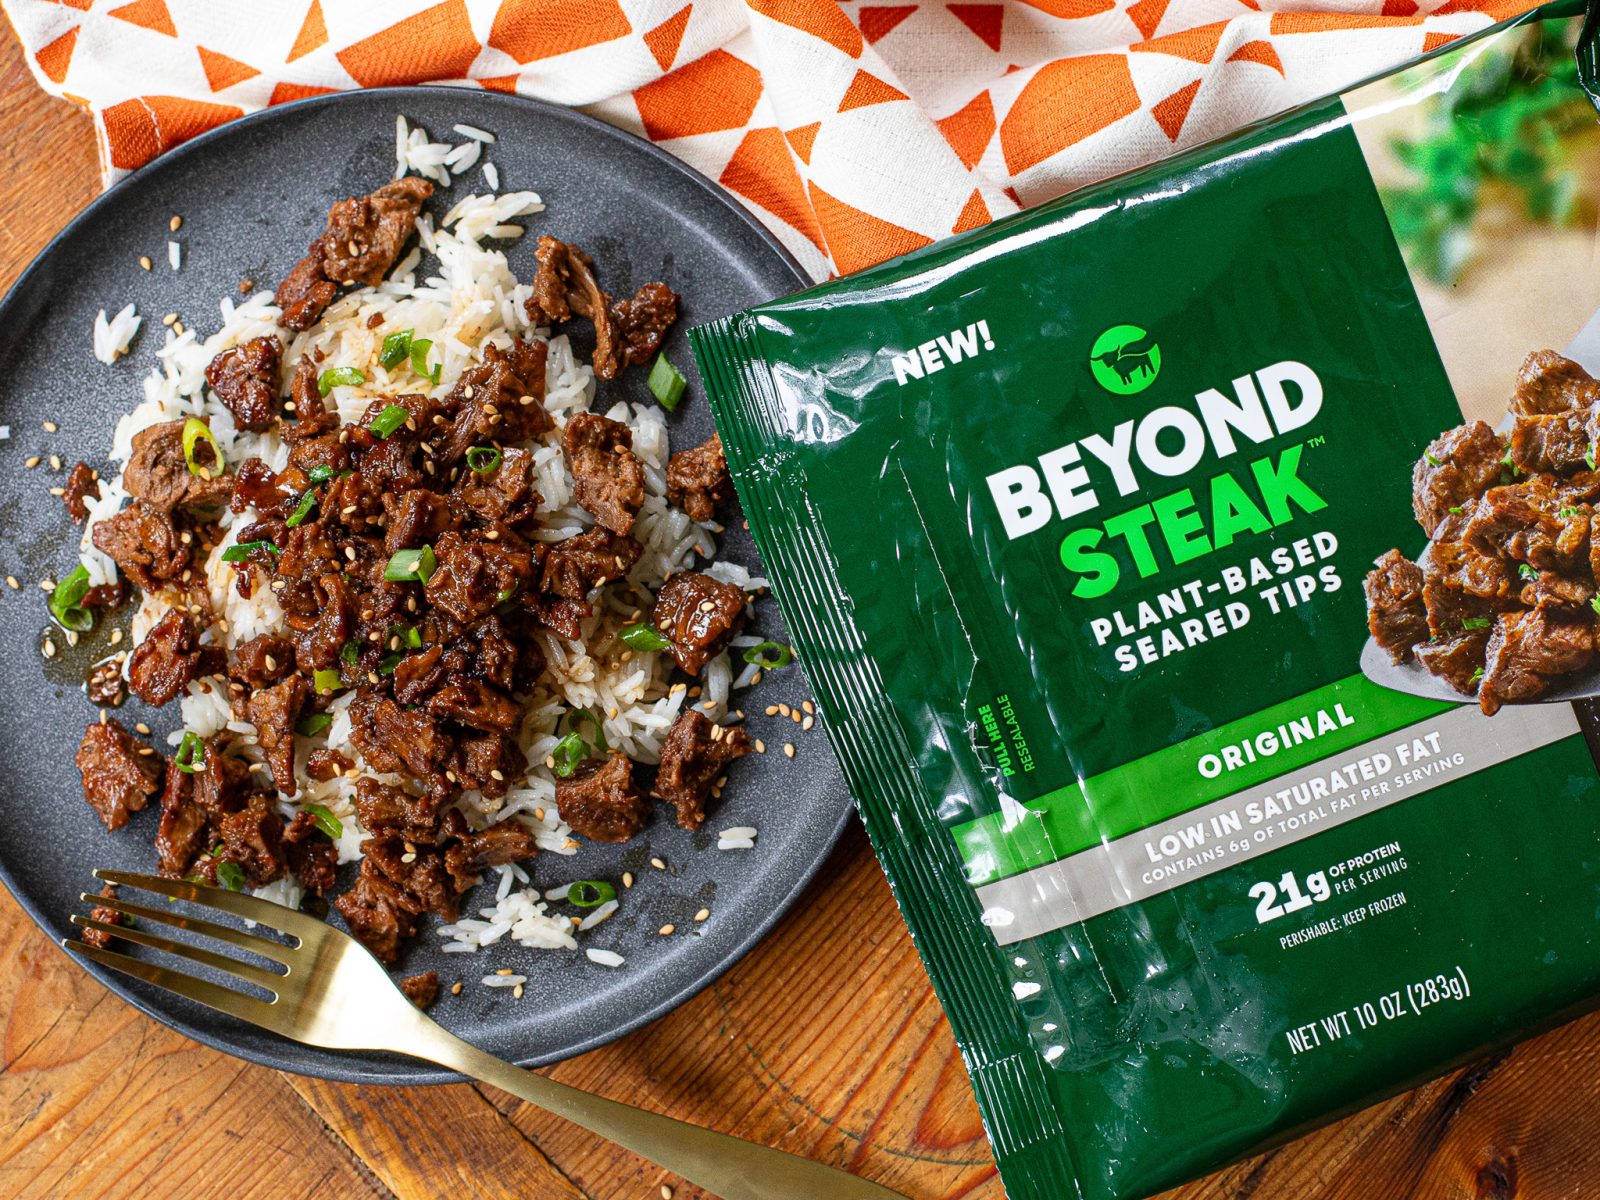 Fantastic Deals On Beyond Meatless Items At Kroger – As Low As $2.99